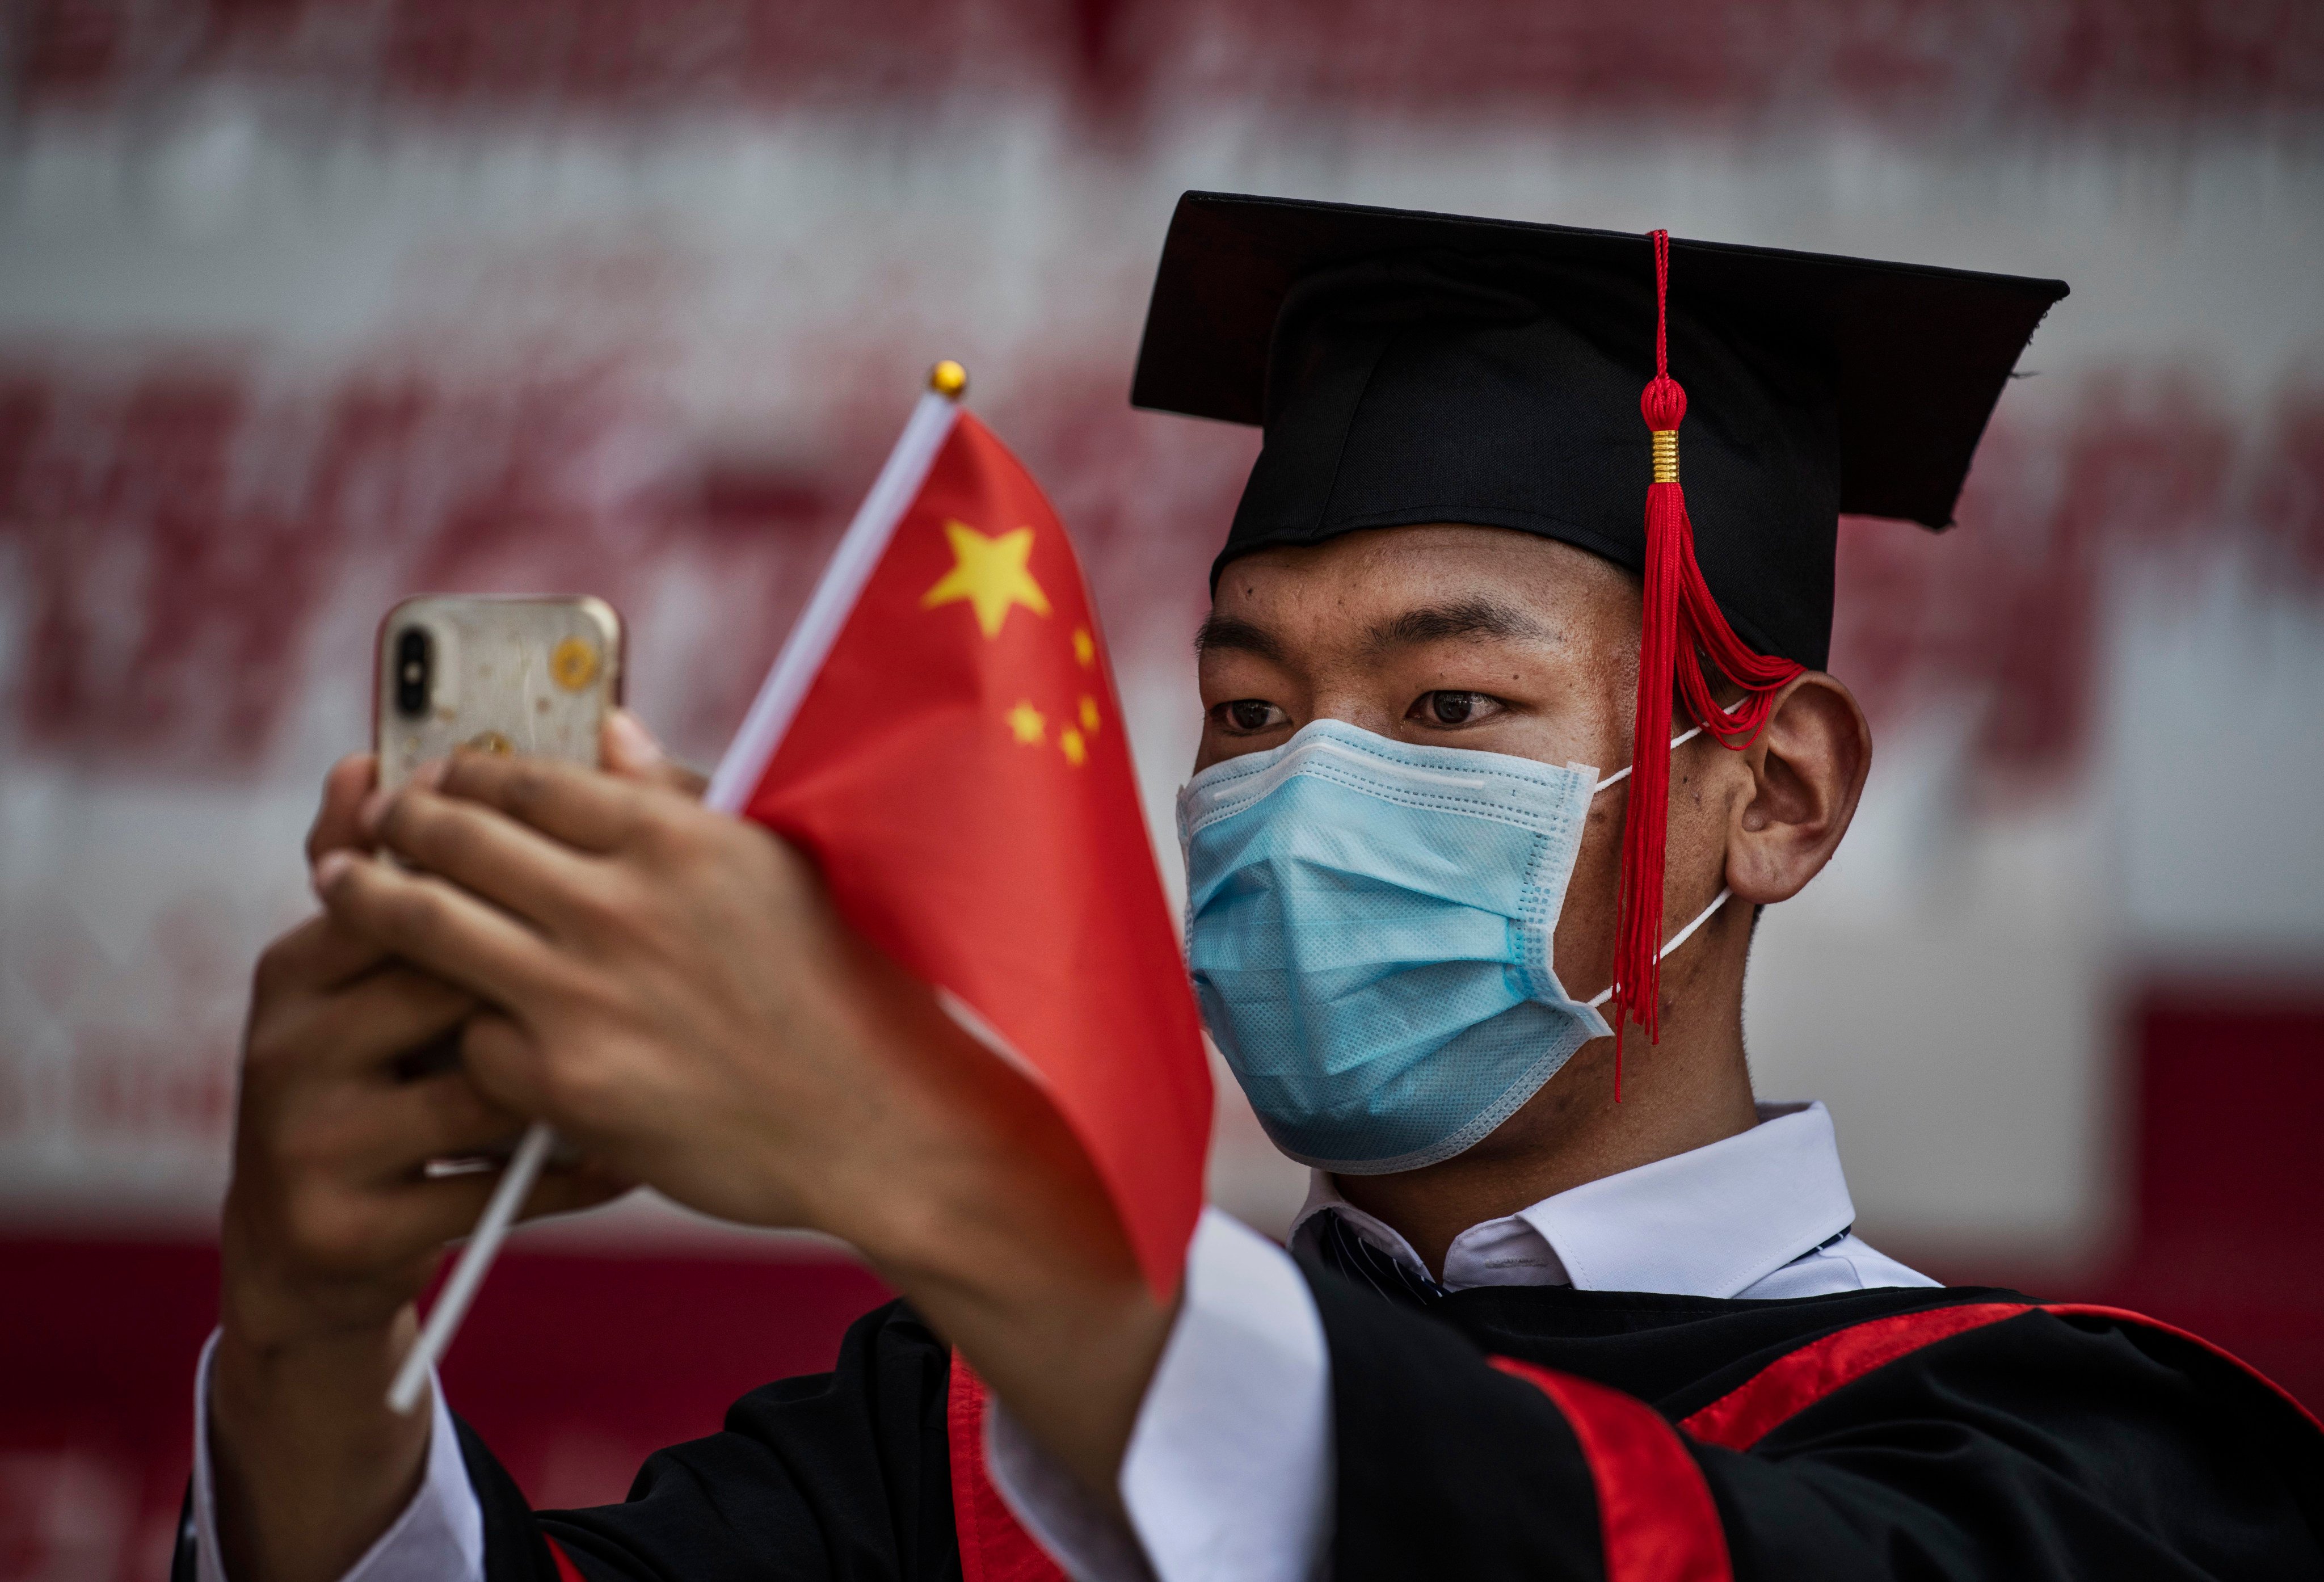 China’s zero-Covid policy has exacerbated the difficulties facing fresh graduates in finding work. Photo: Getty Images